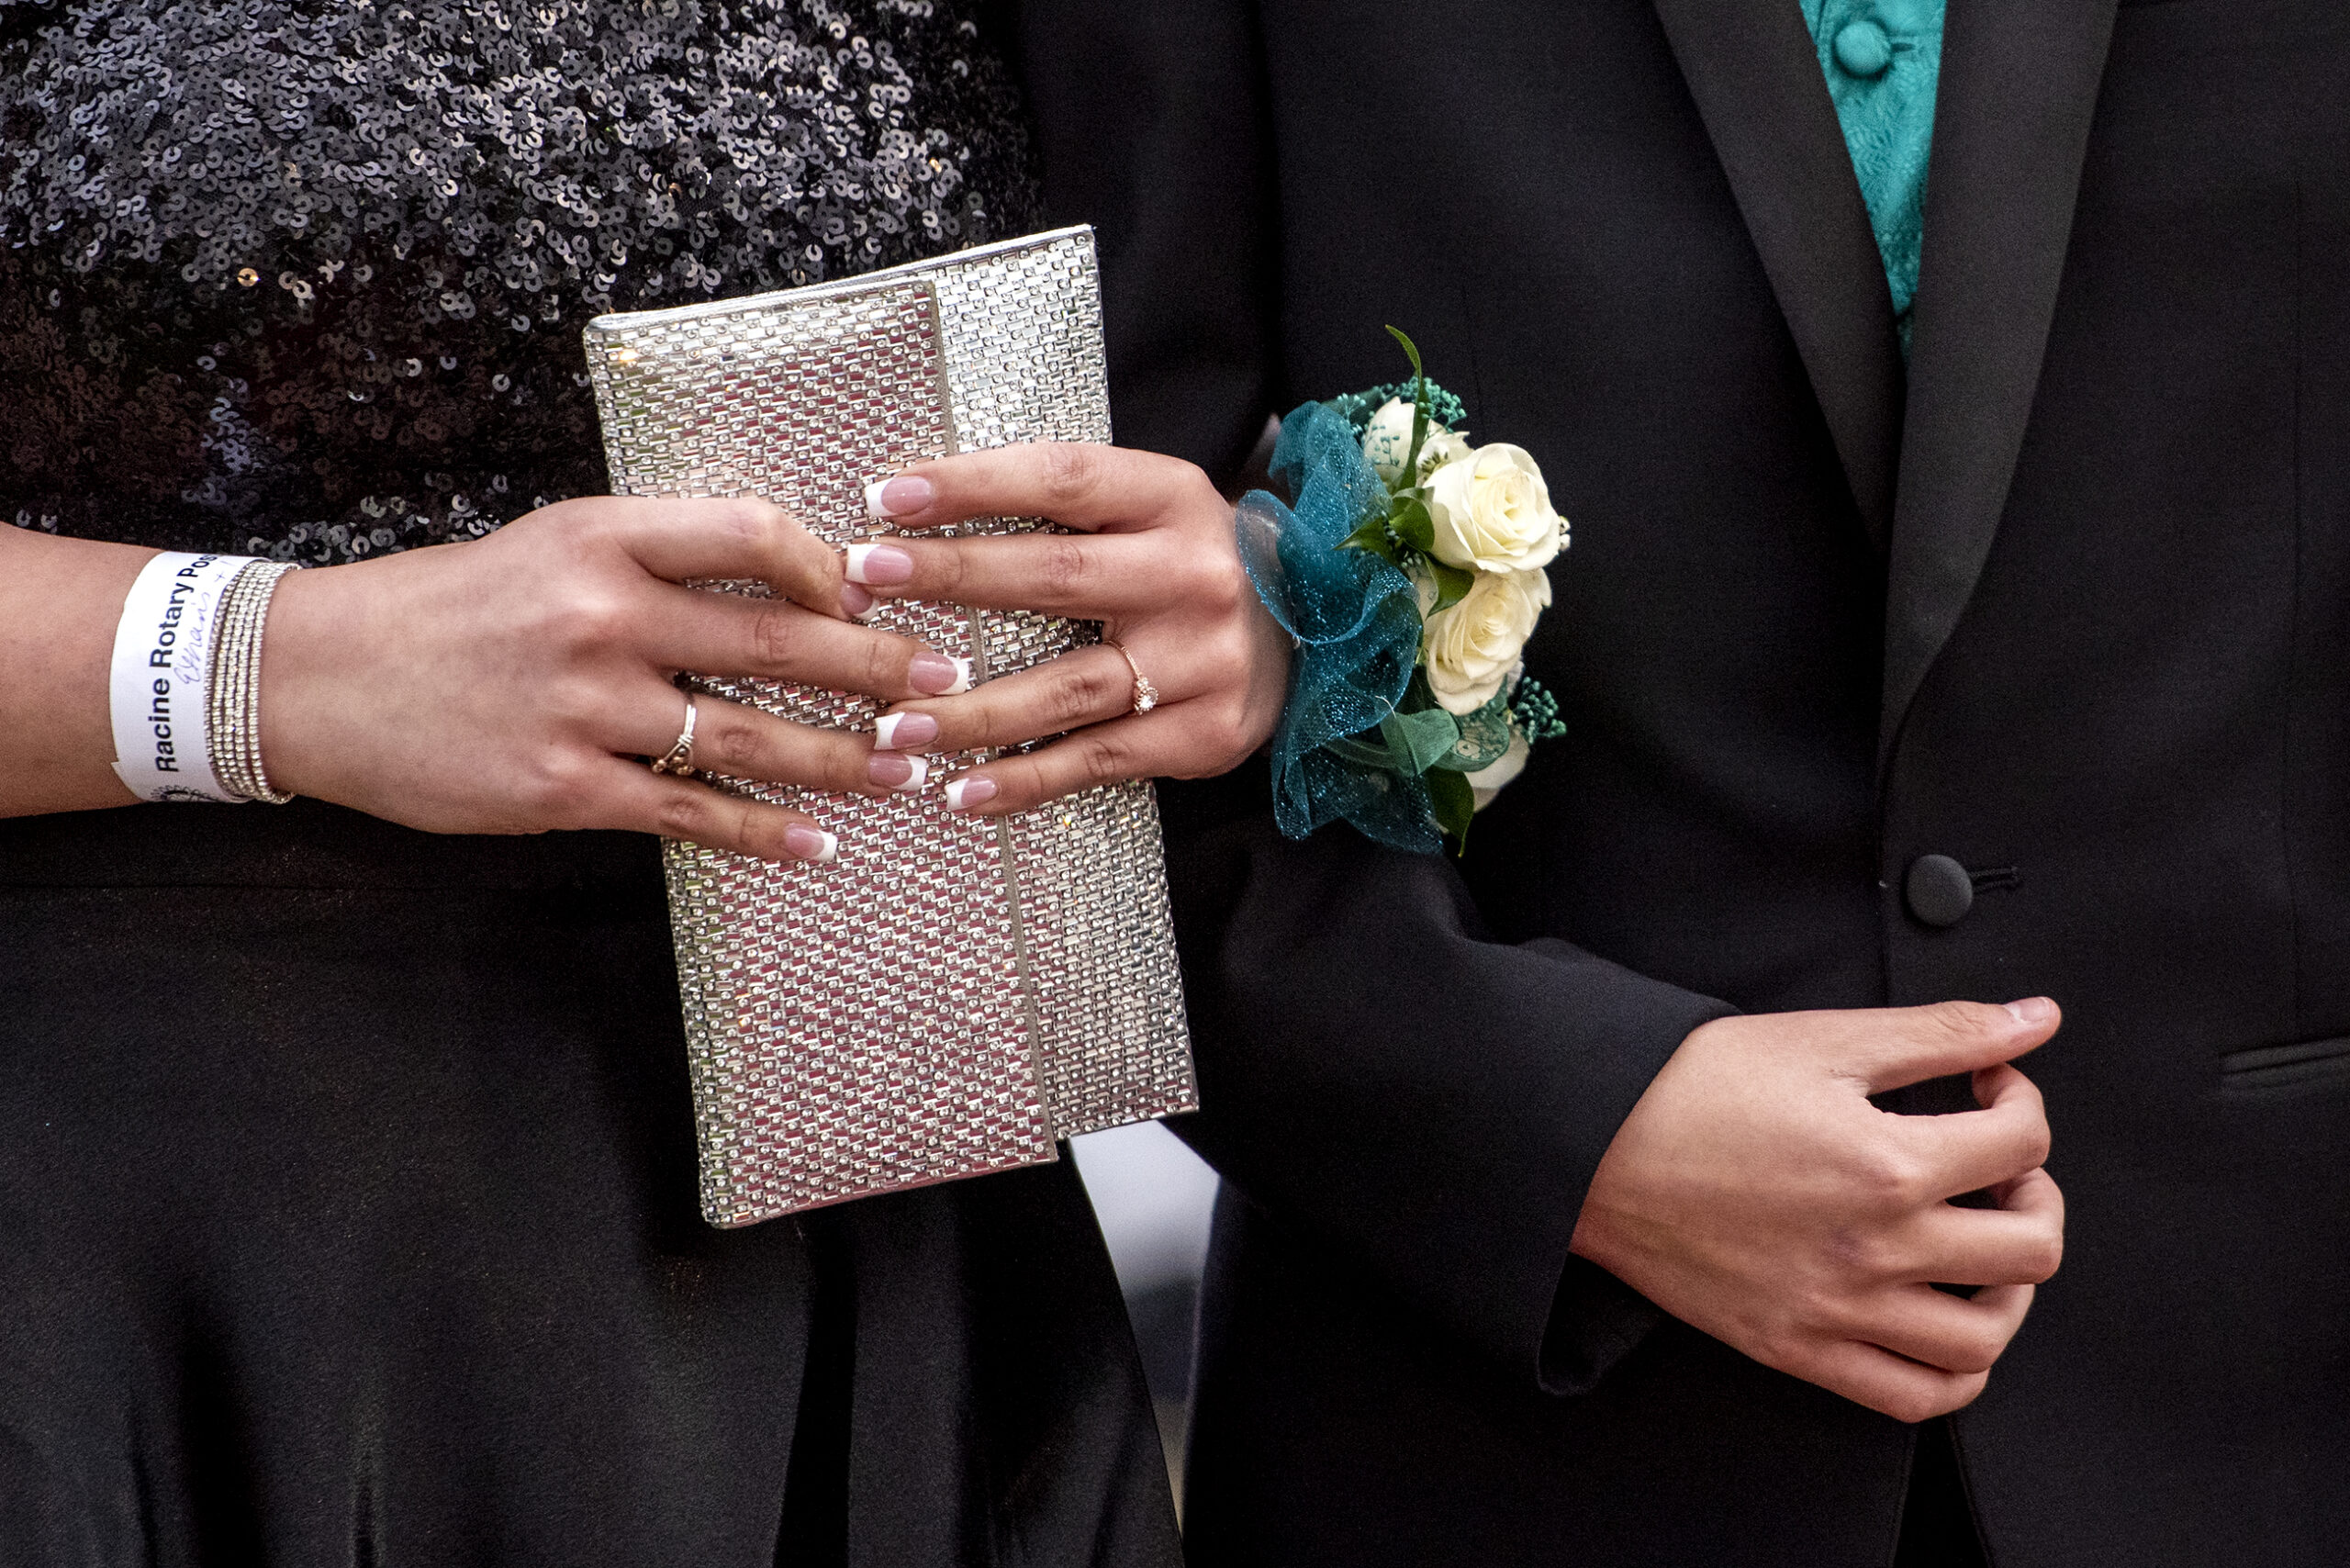 Details showing two prom dates with a glittery clutch bag, a corsage with white flowers, and formal wear.